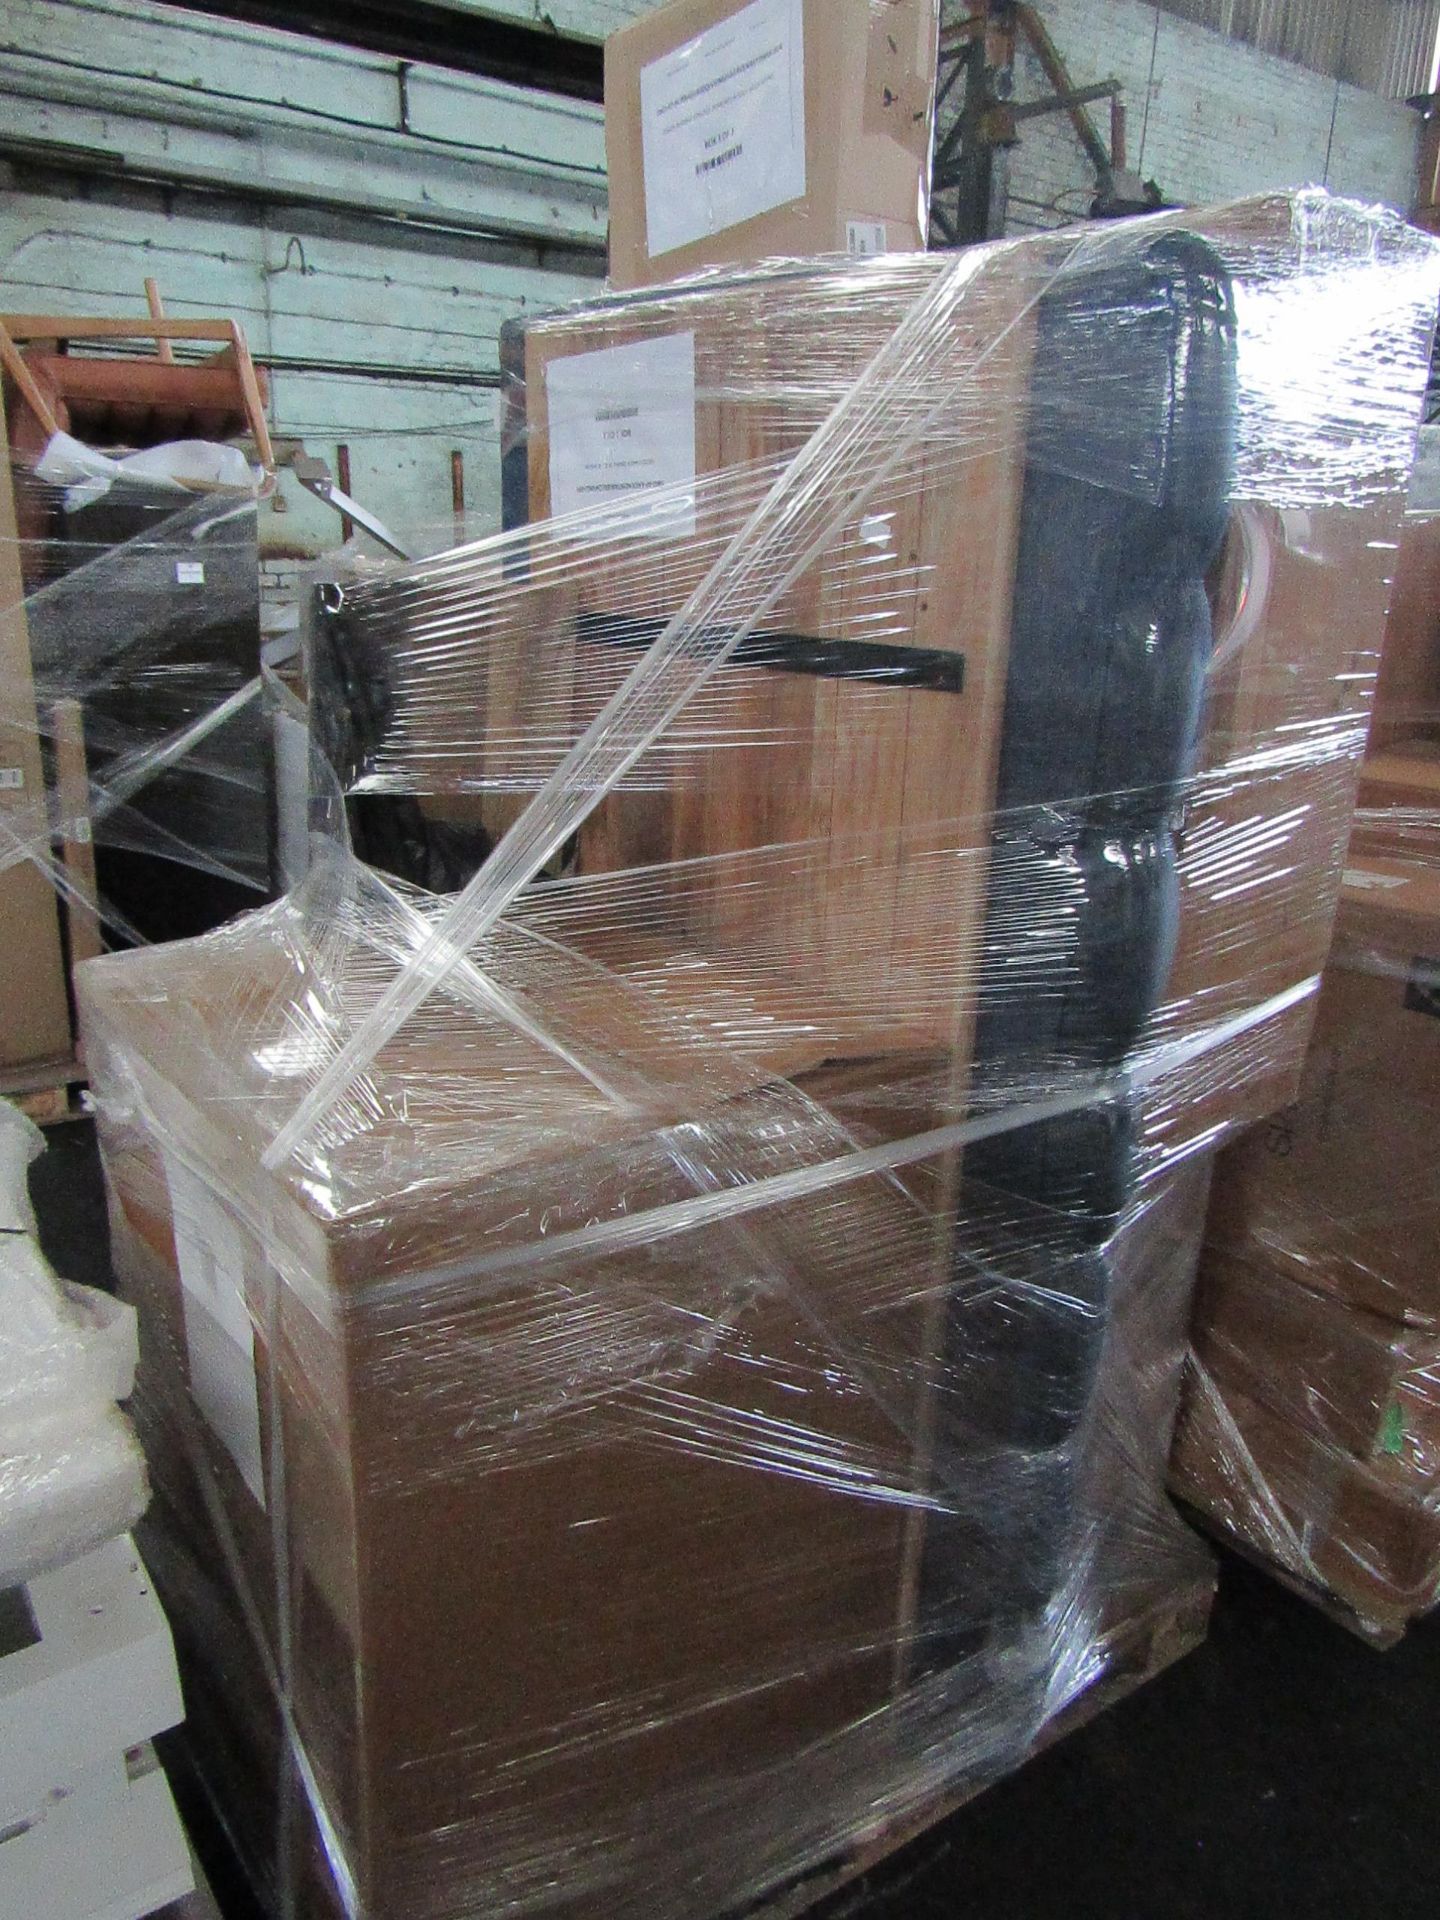 This pallet of branded customer returns contains products that have incurred damage to varying